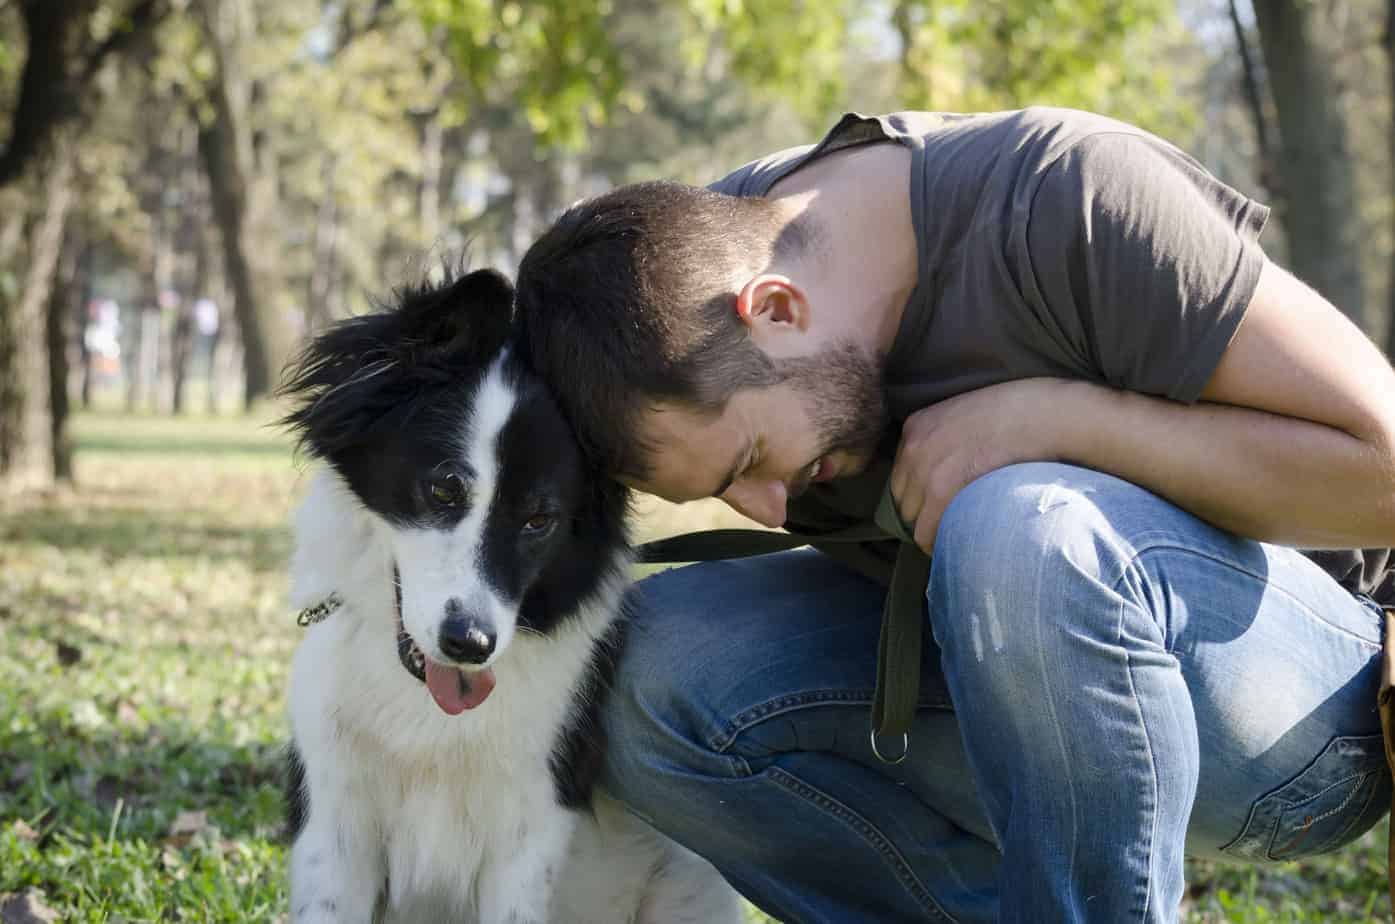 Msn cuddles with border collie. When you re-home dogs, help them adjust by incorporating old habits in their new routines.